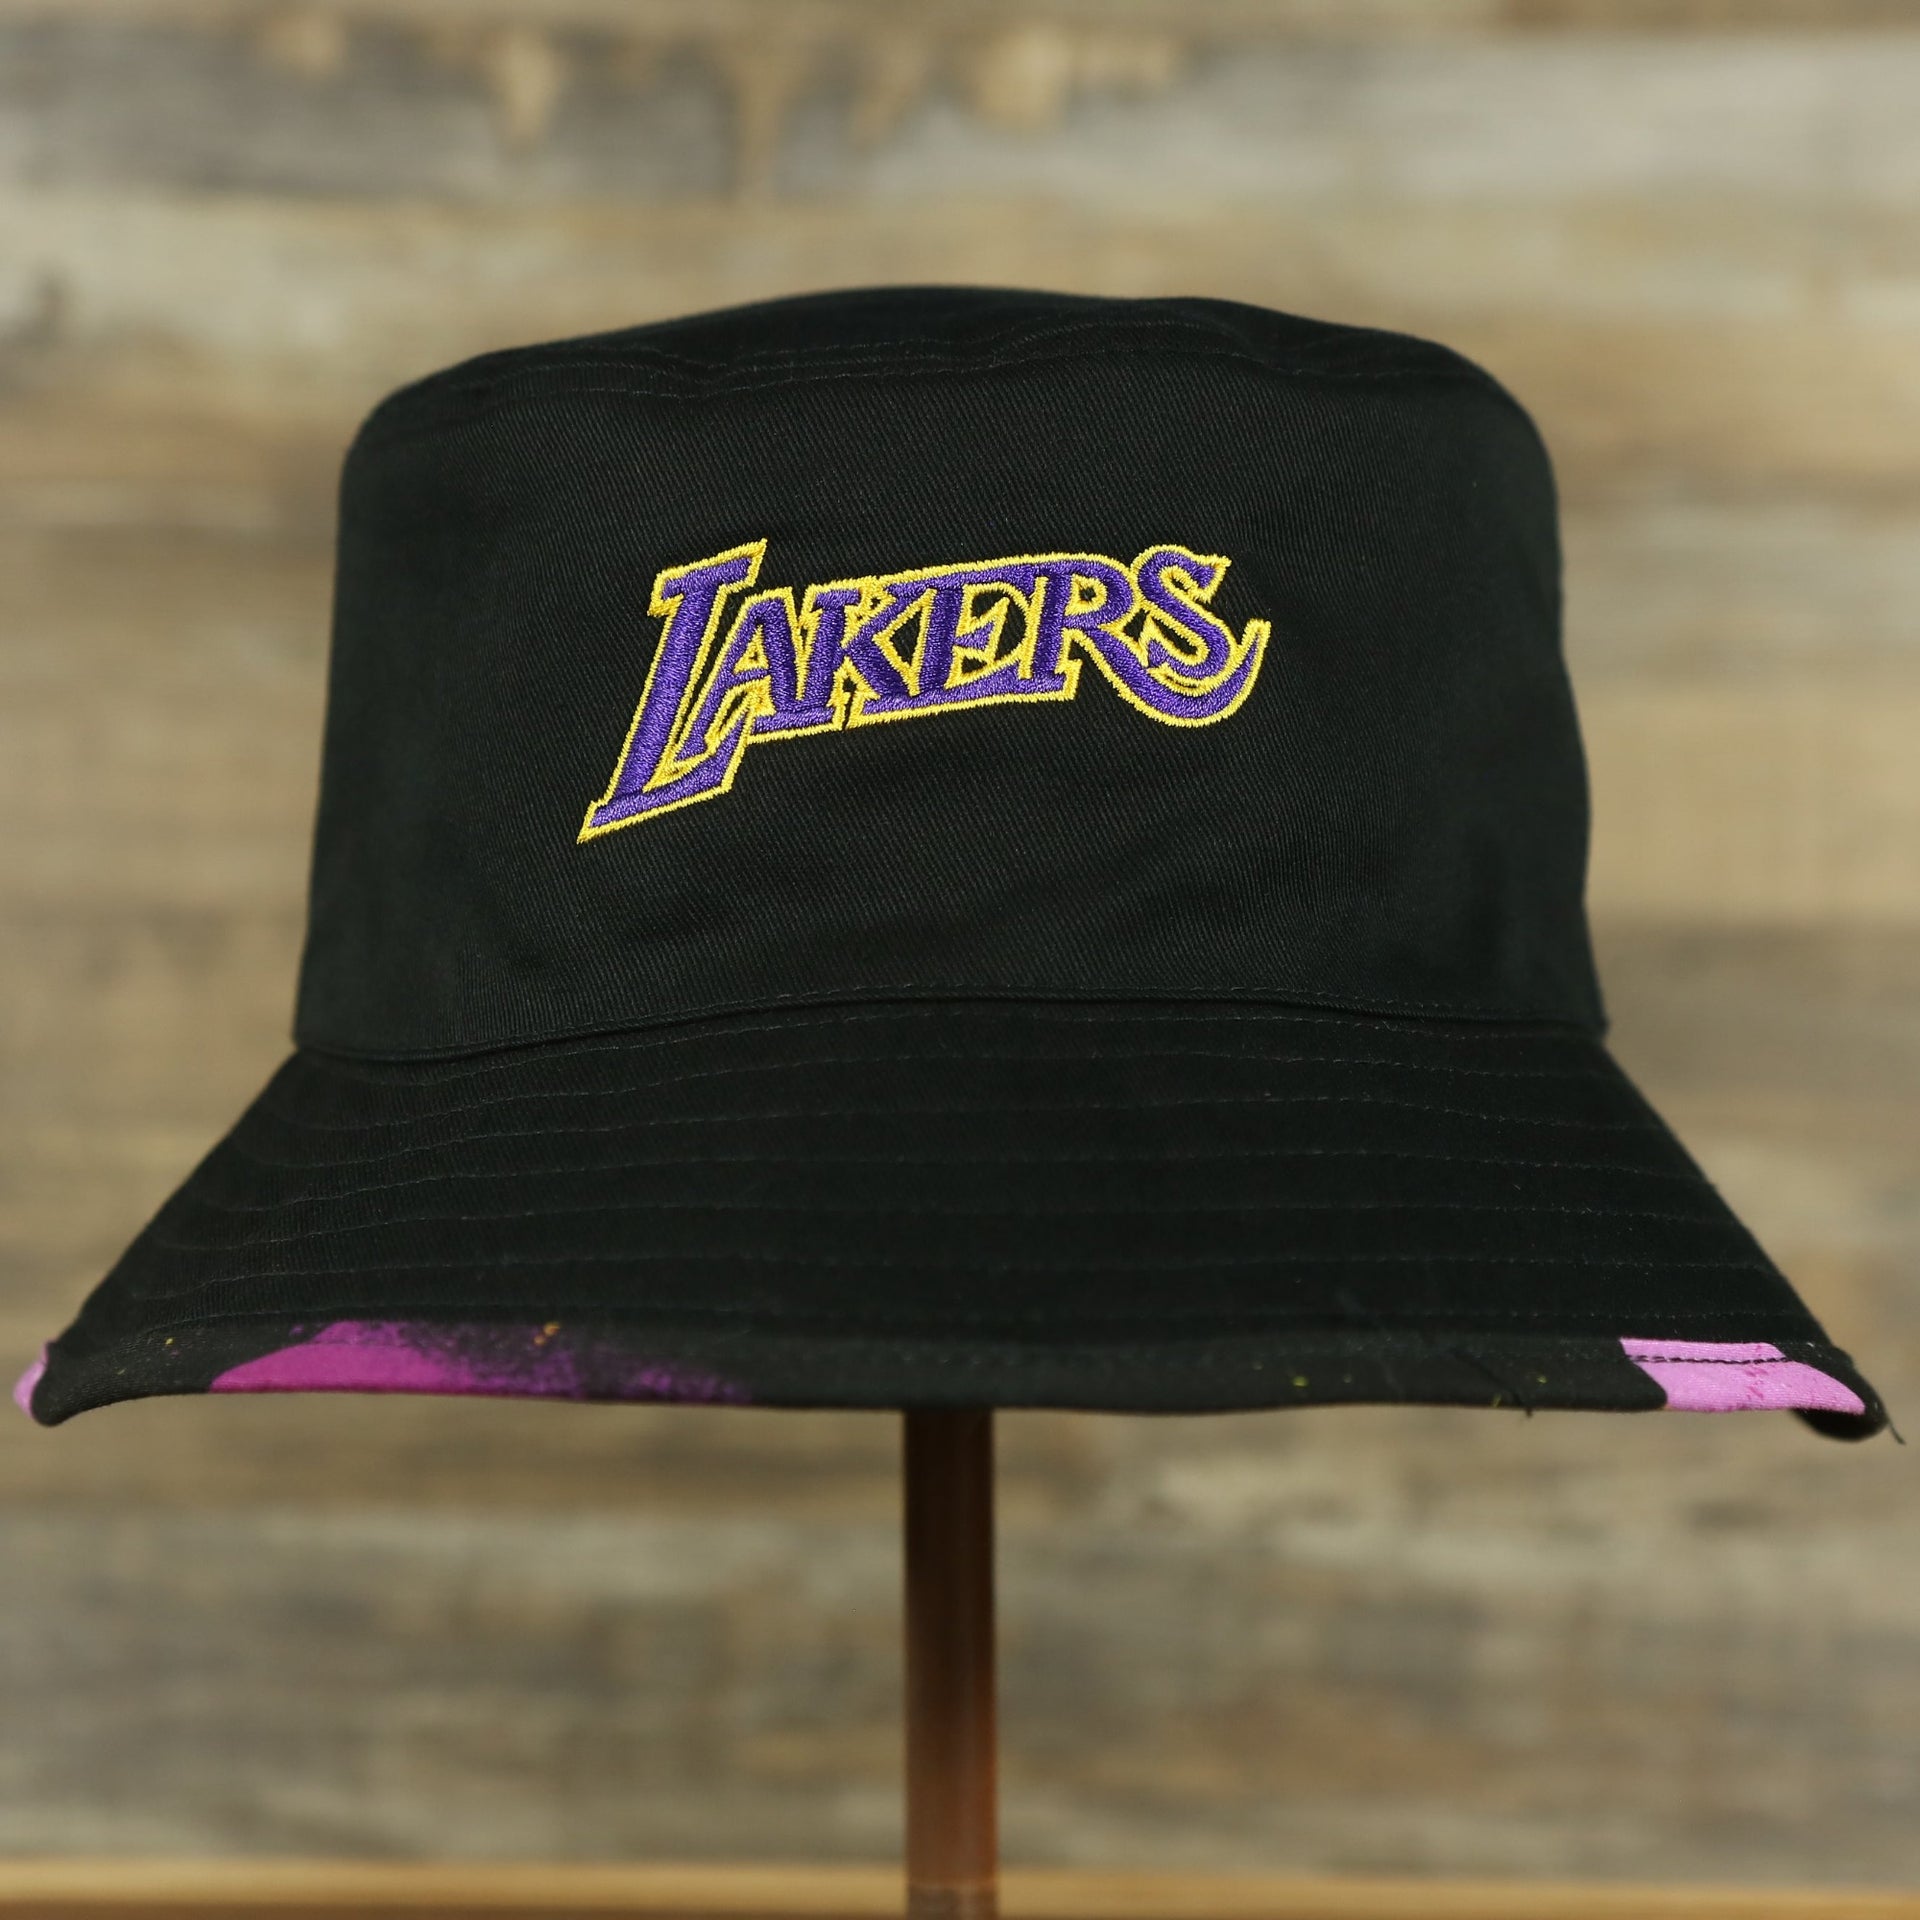 lakers logo on the Los Angeles Lakers 90s Inspired NBA Hyper Mitchell and Ness Reversible Bucket Hat